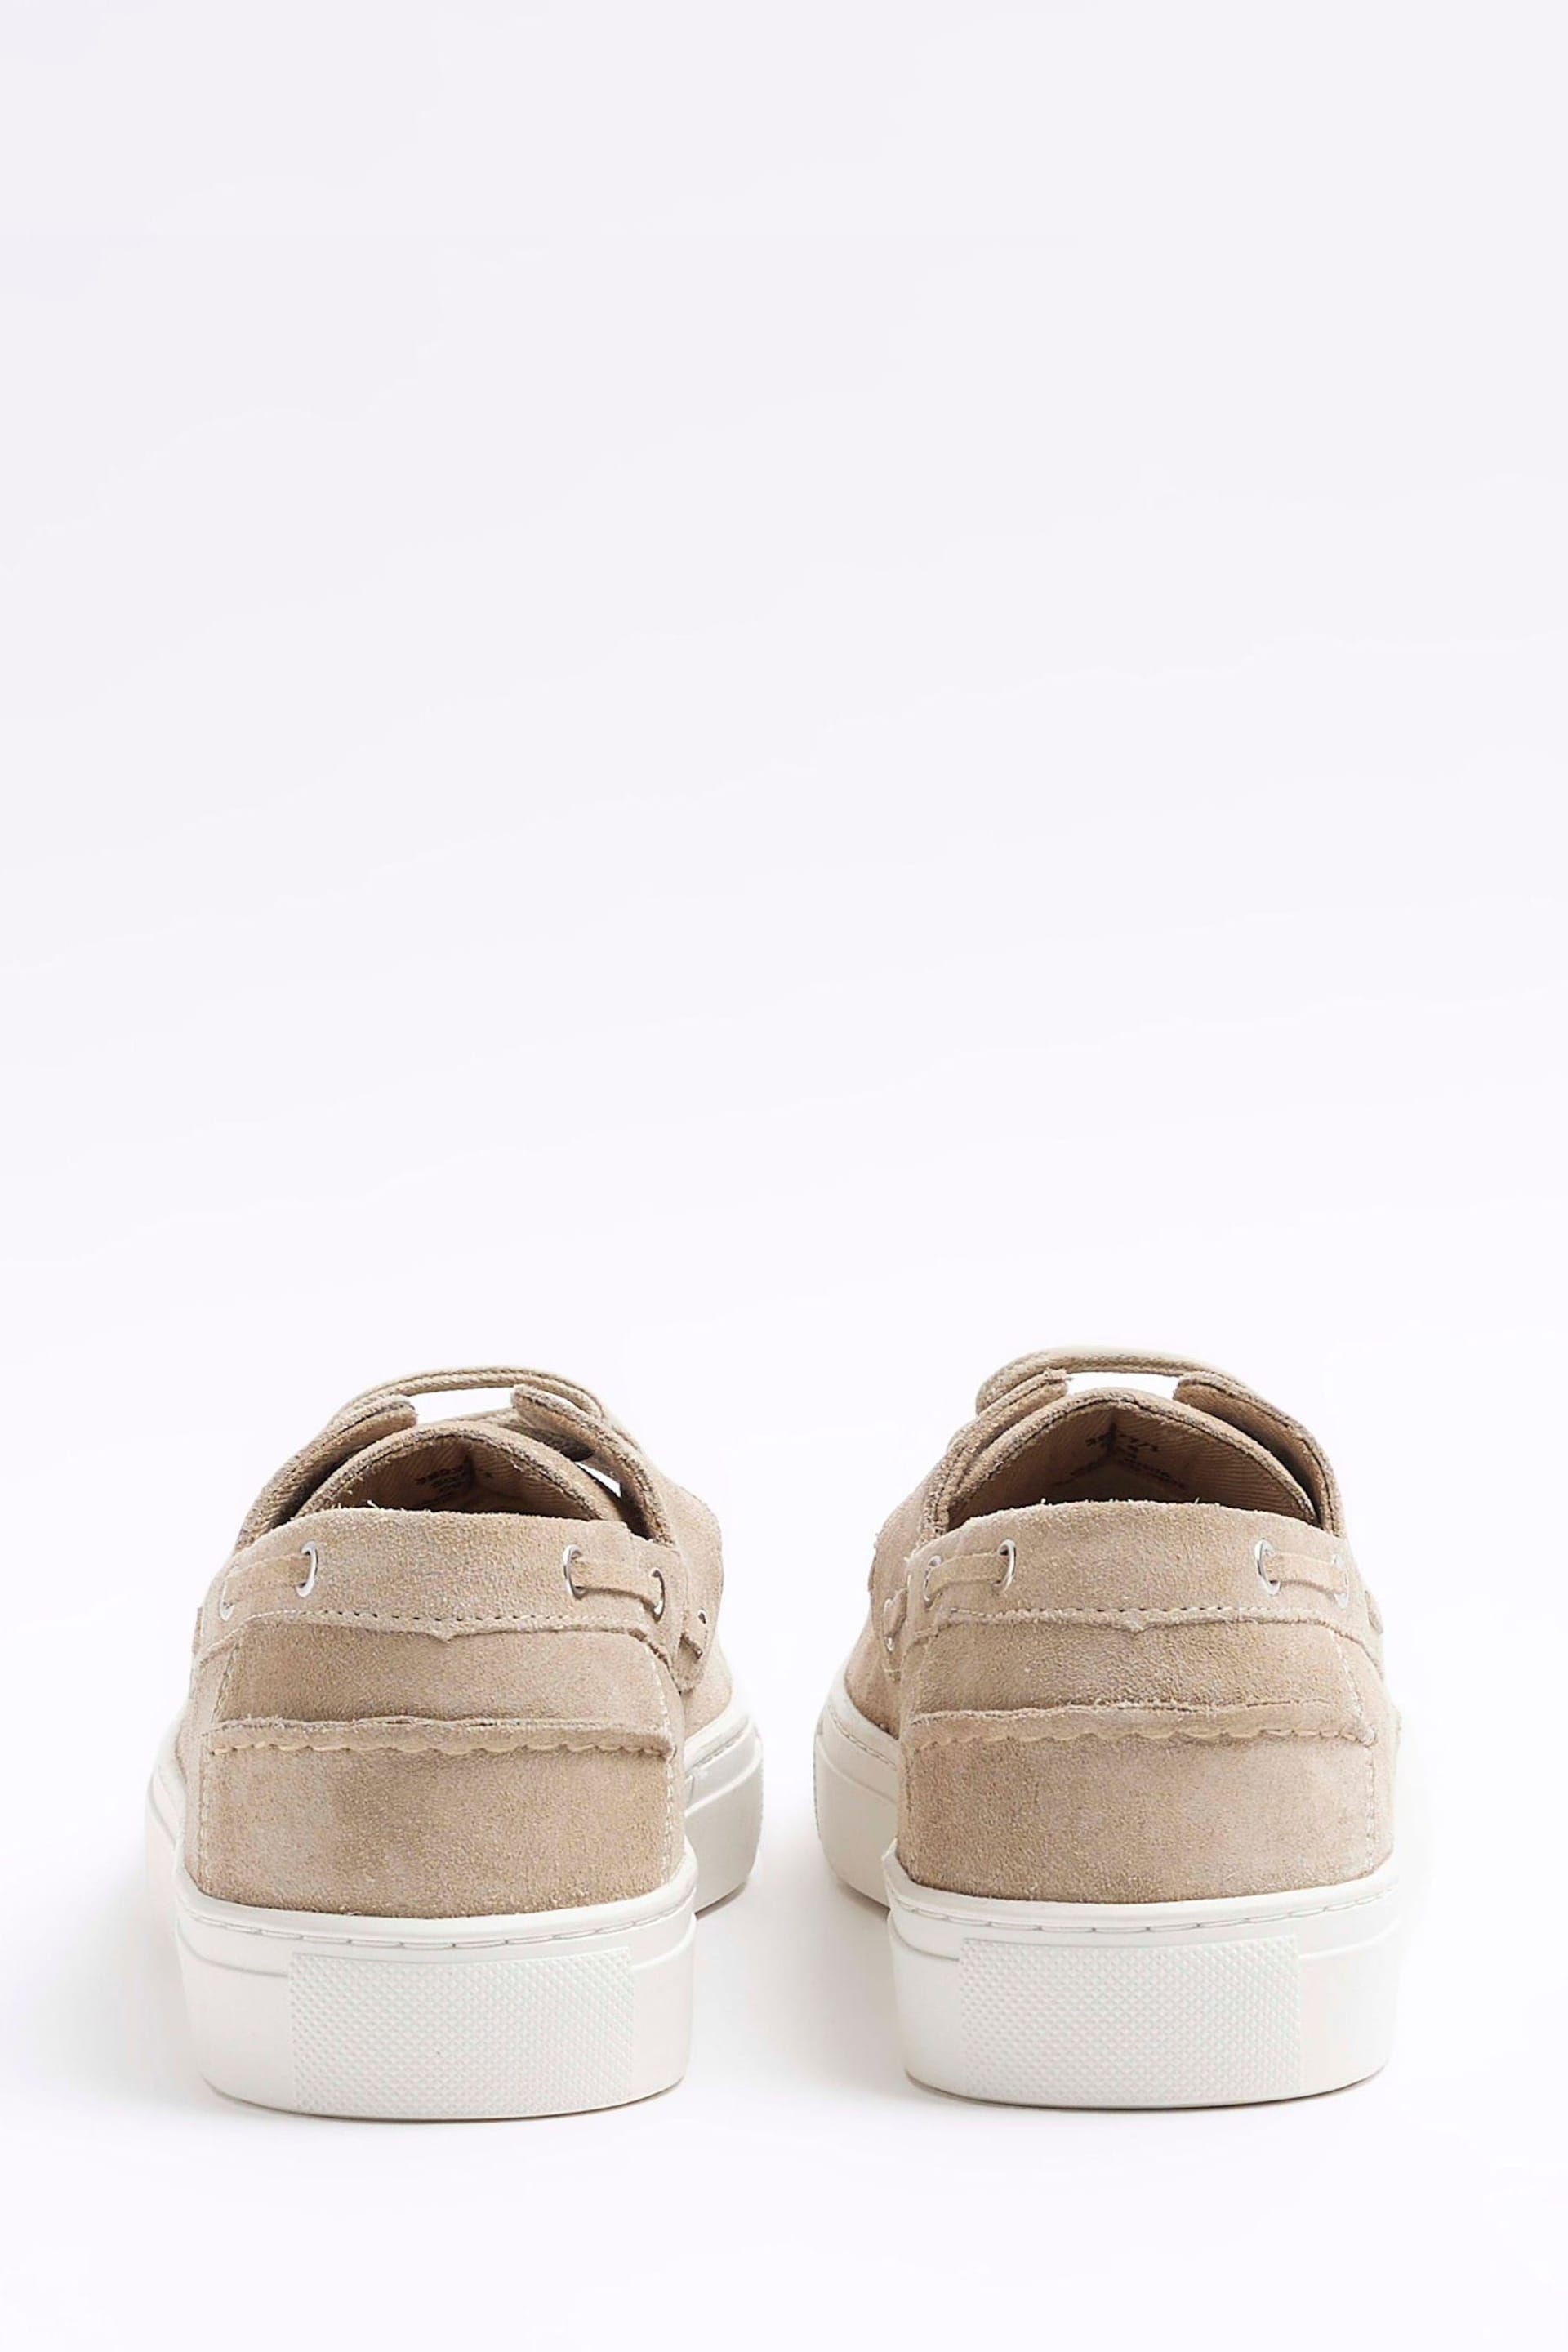 River Island Brown Suede Boat Shoes - Image 4 of 4